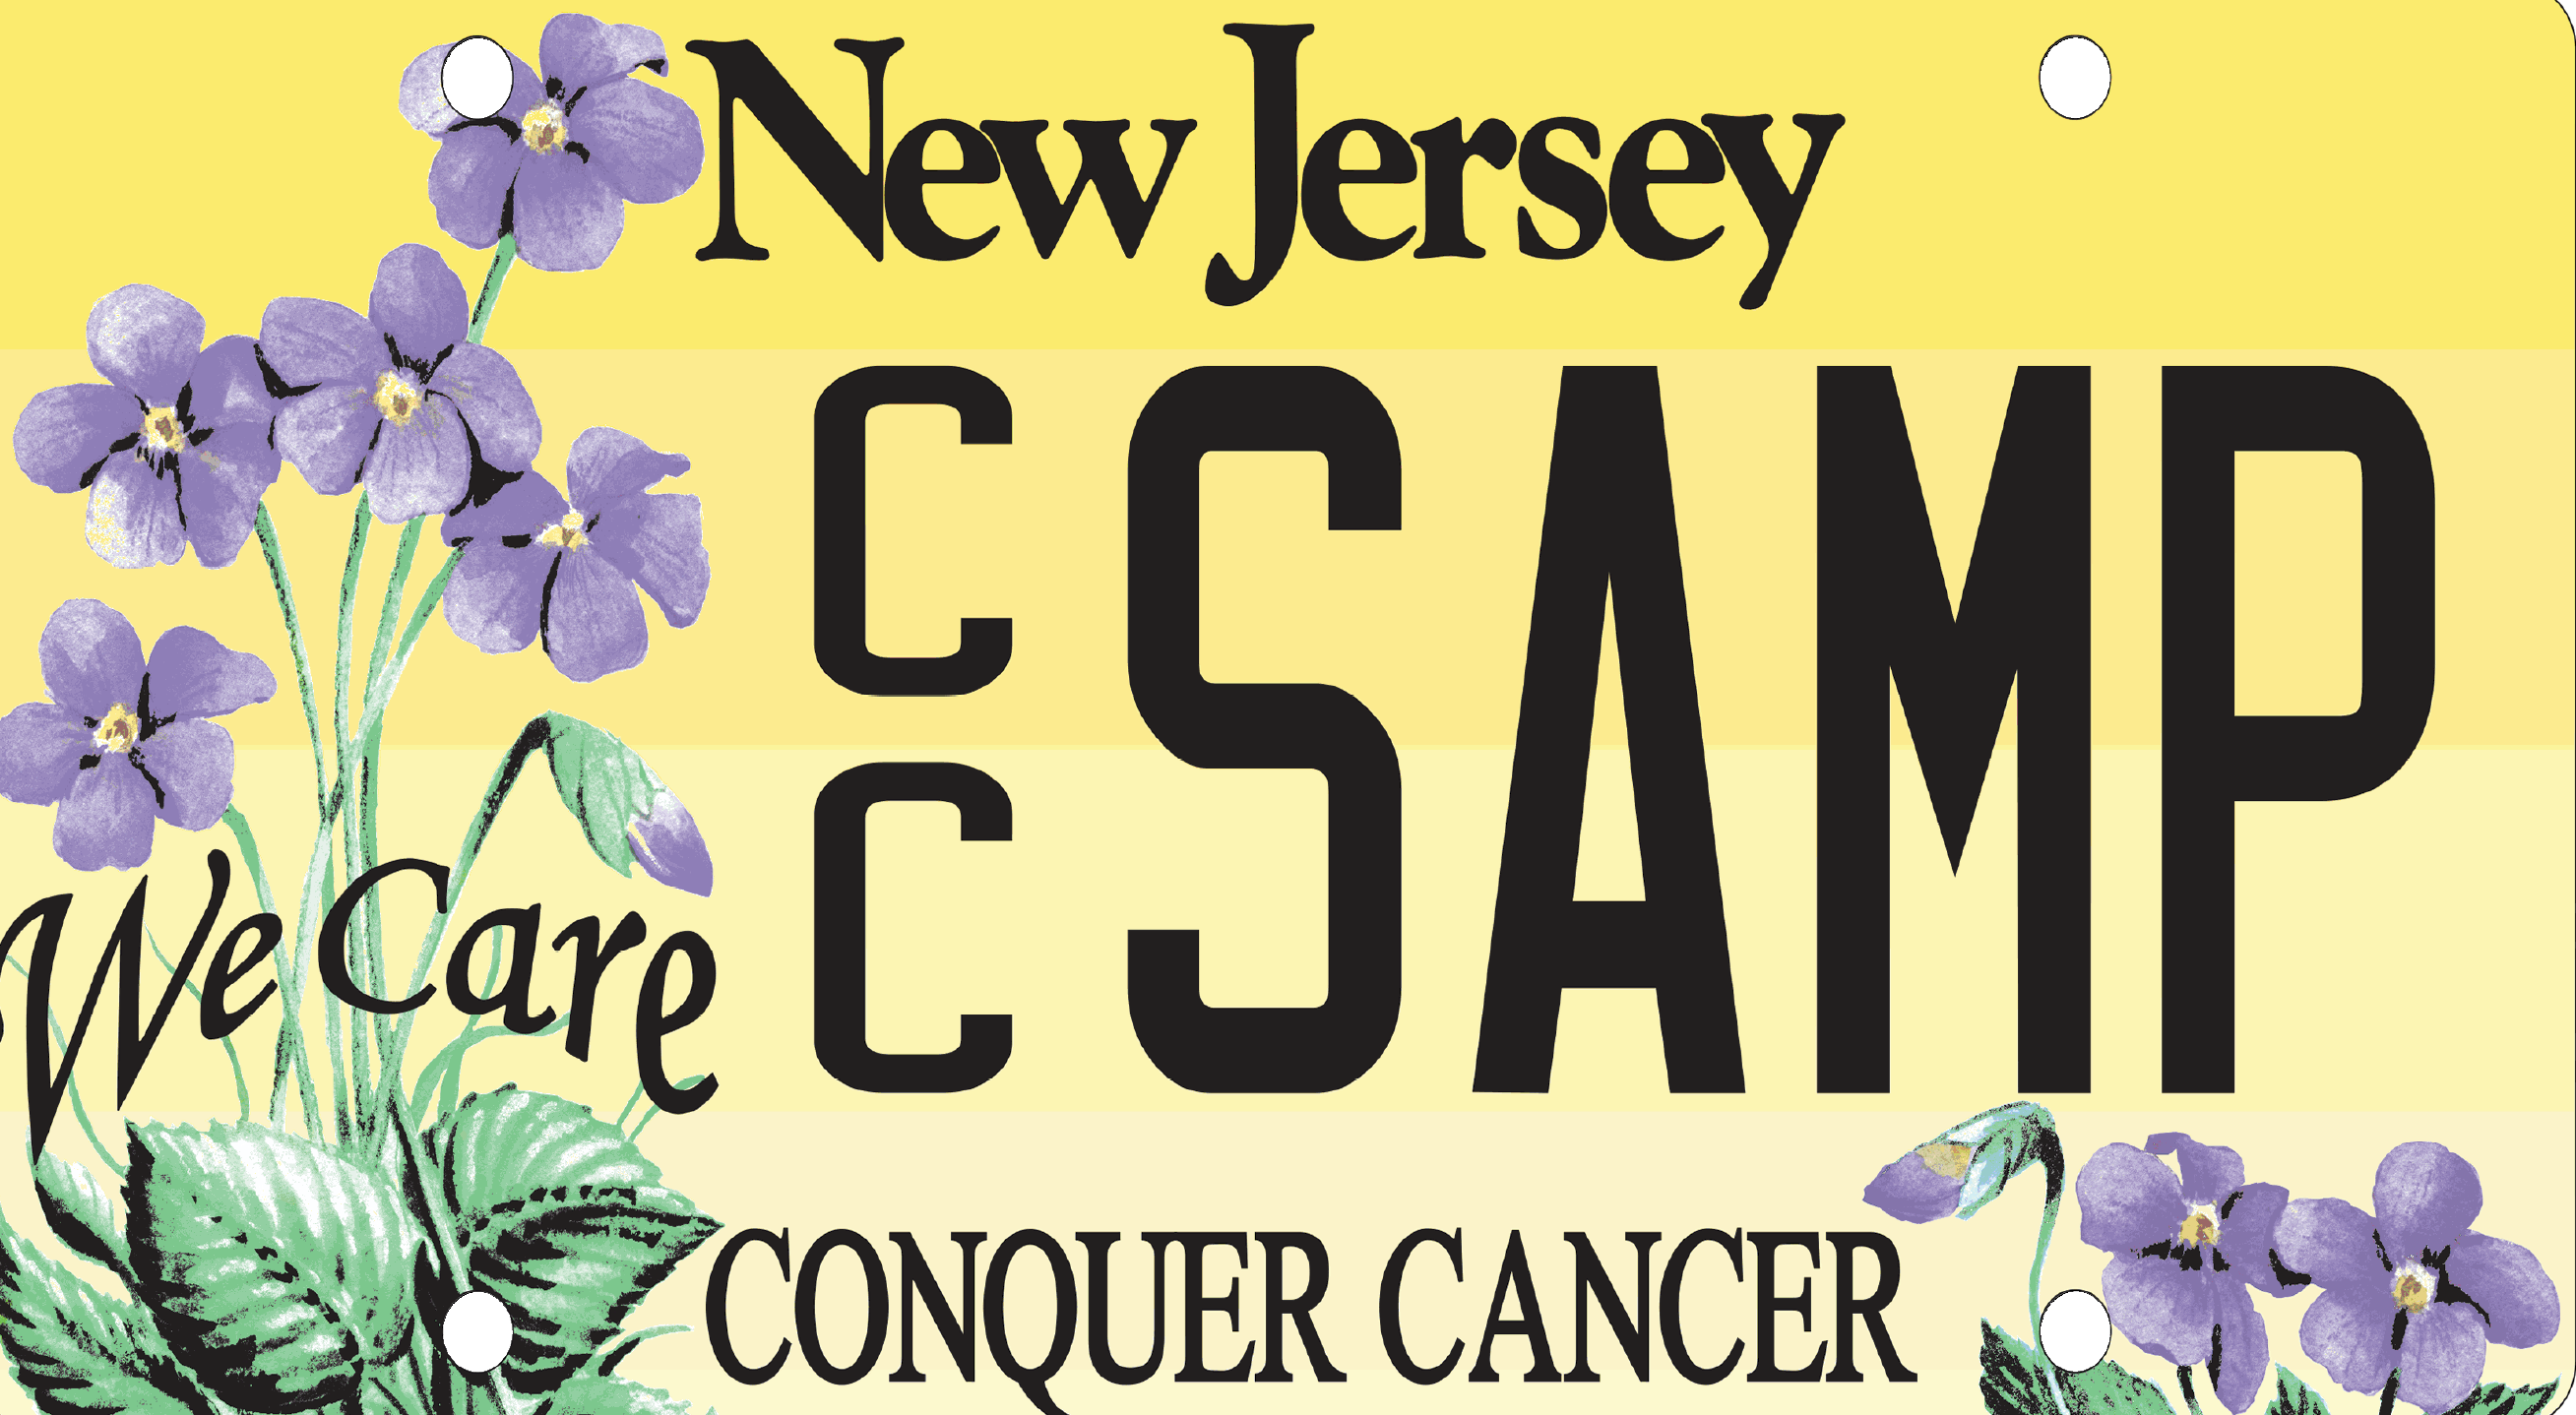 An example of a New Jersey Conquer Cancer License Plate